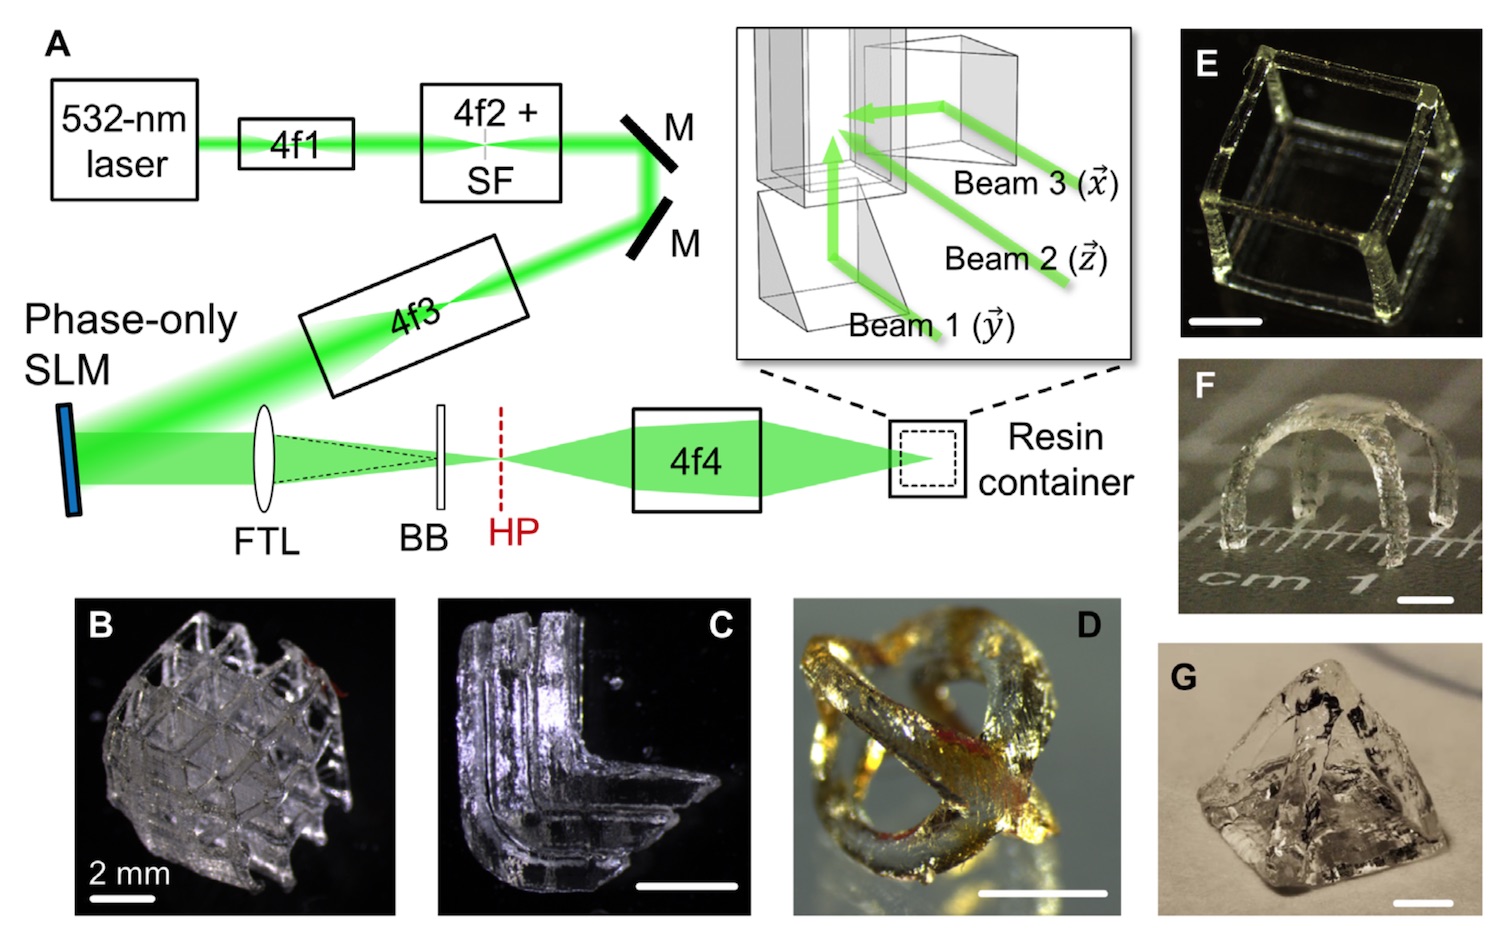 Holography-based 3D printing produces objects in seconds instead of hours